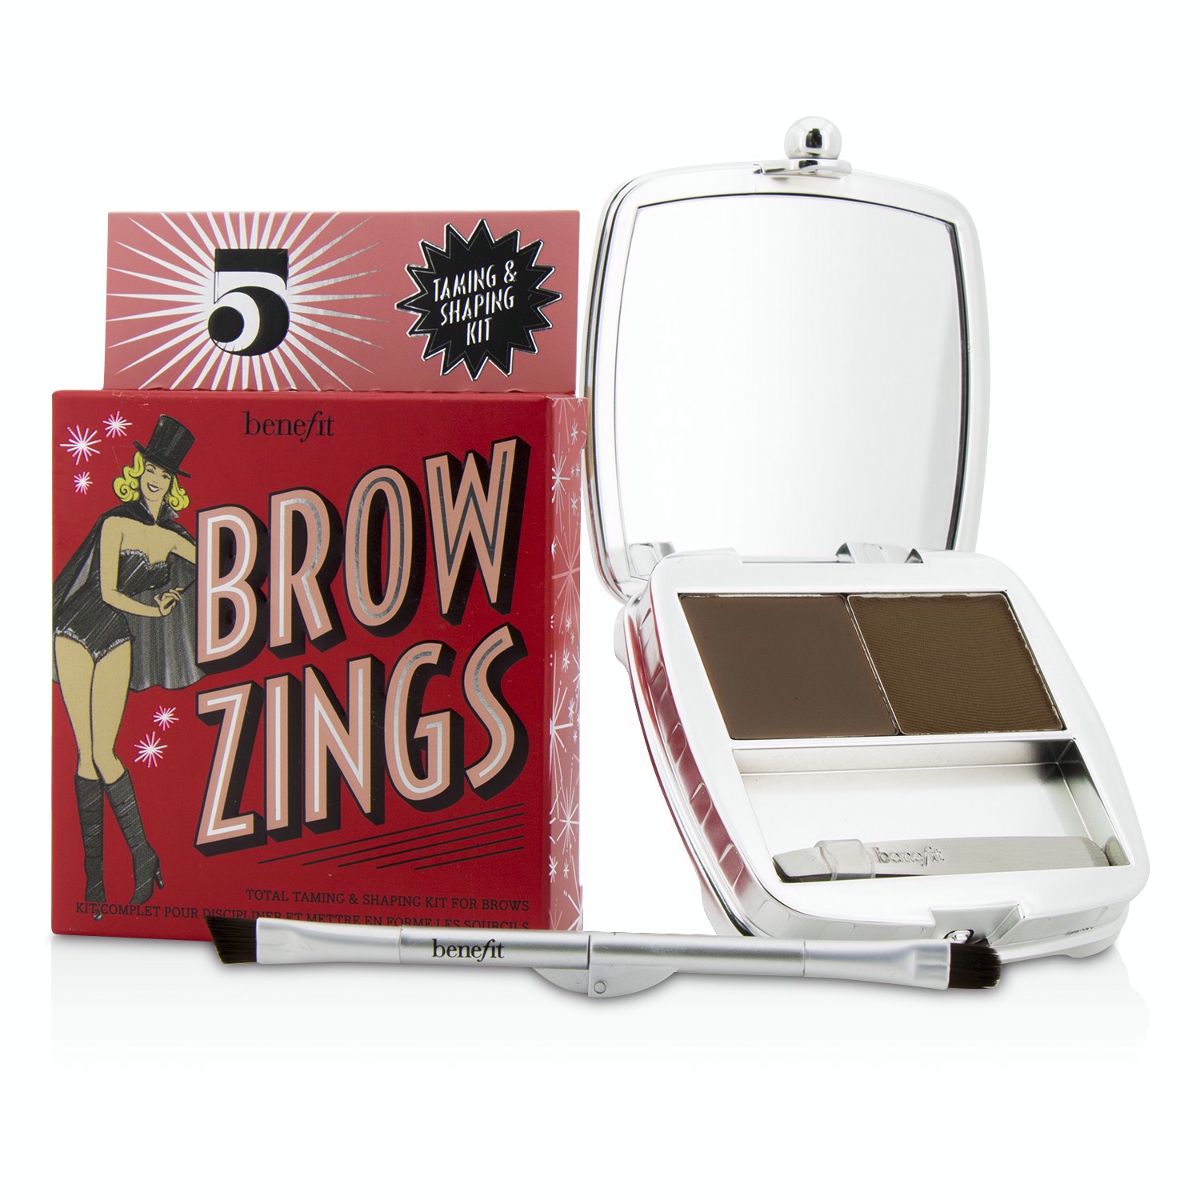 Brow Zings (Total Taming  Shaping Kit For Brows) - #5 (Deep) Benefit Image